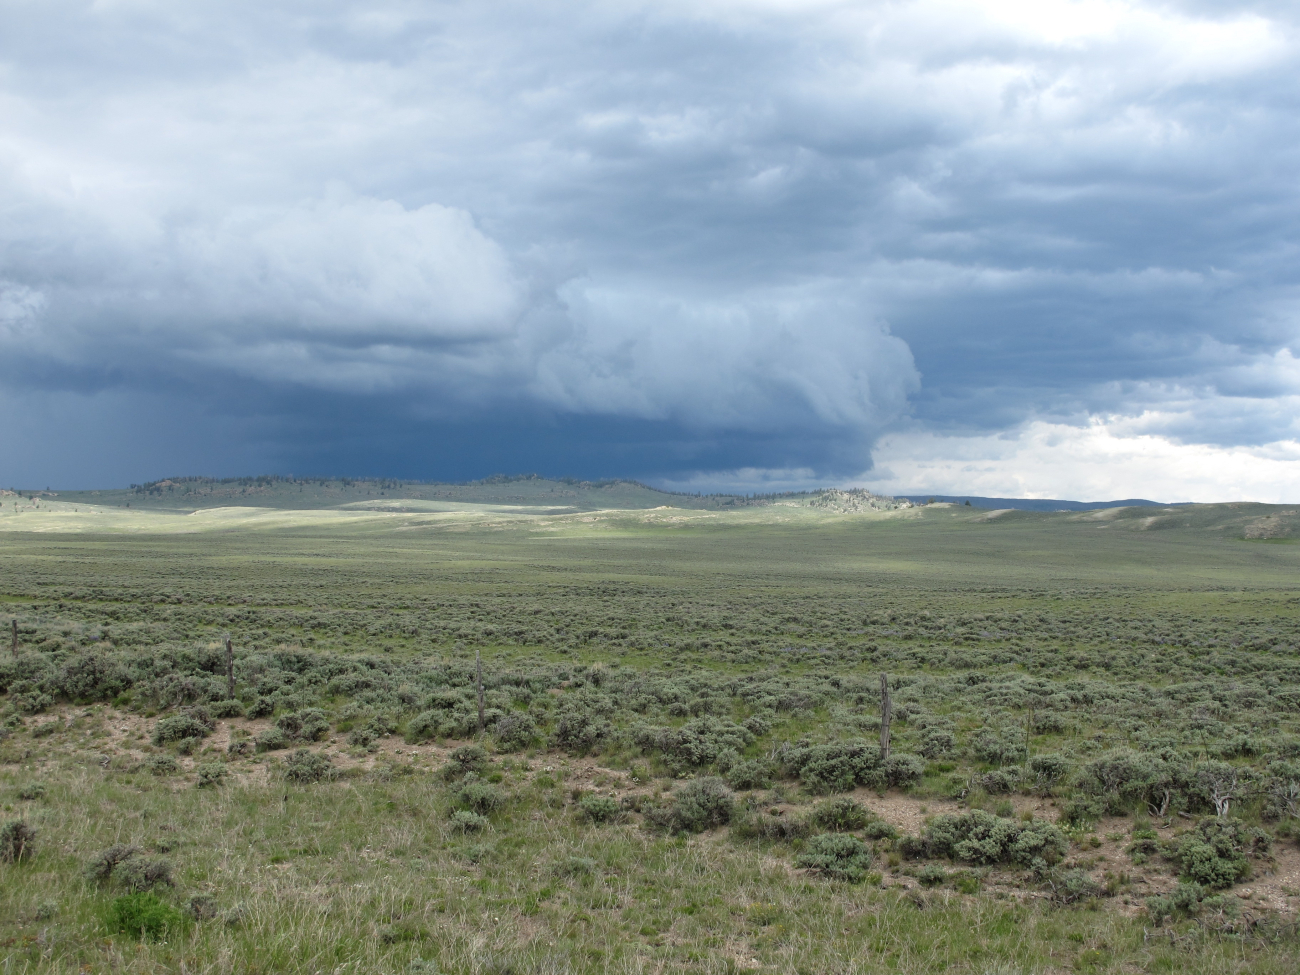 A thunderstorm in the distance close to the Wyoming state line between Gould,Colorado, and Riverside, Wyoming